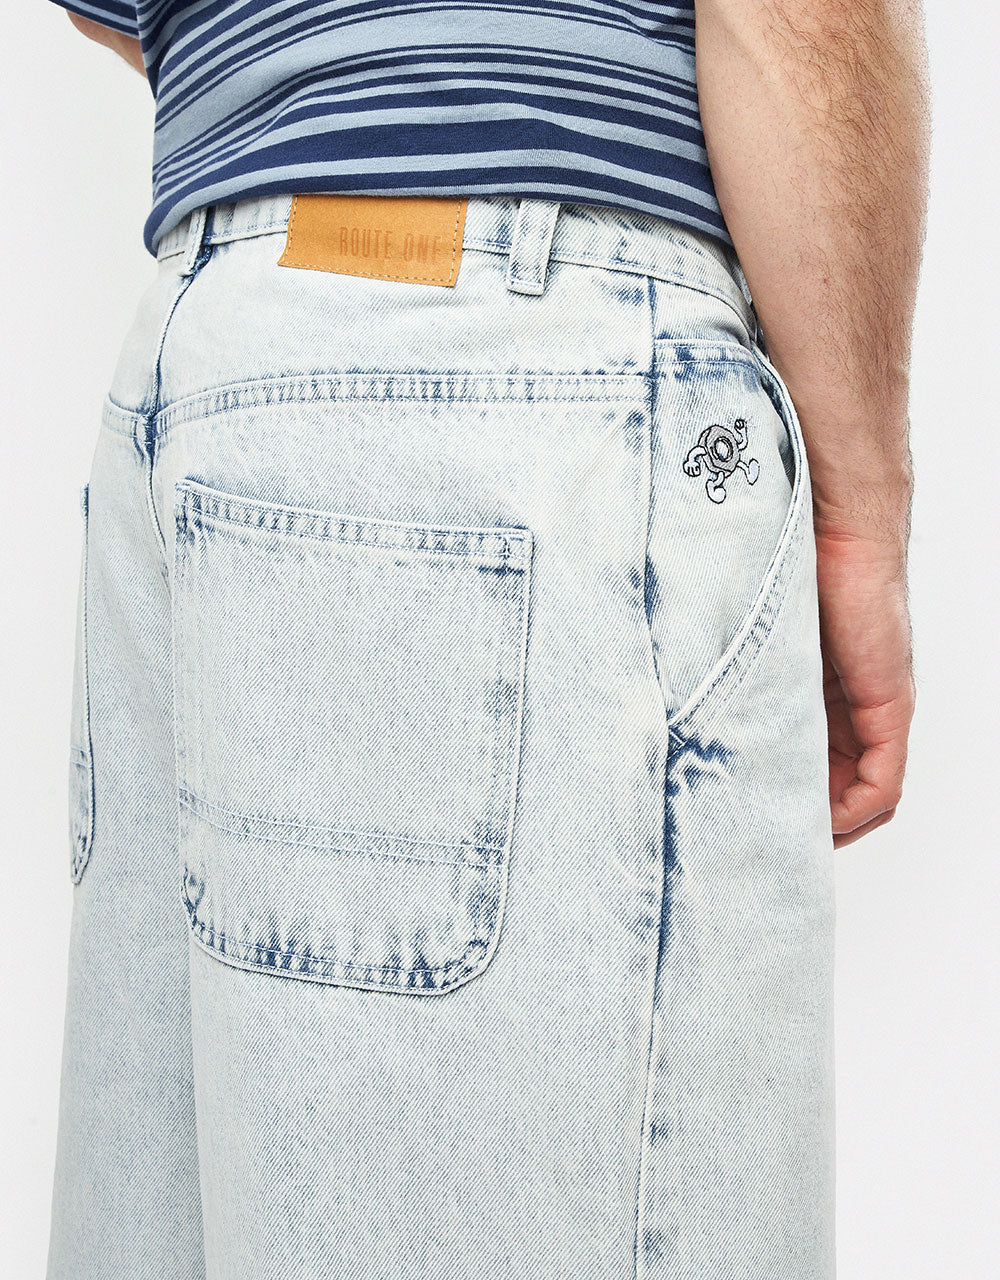 Route One Super Baggy Denim Jeans - Stone Wash